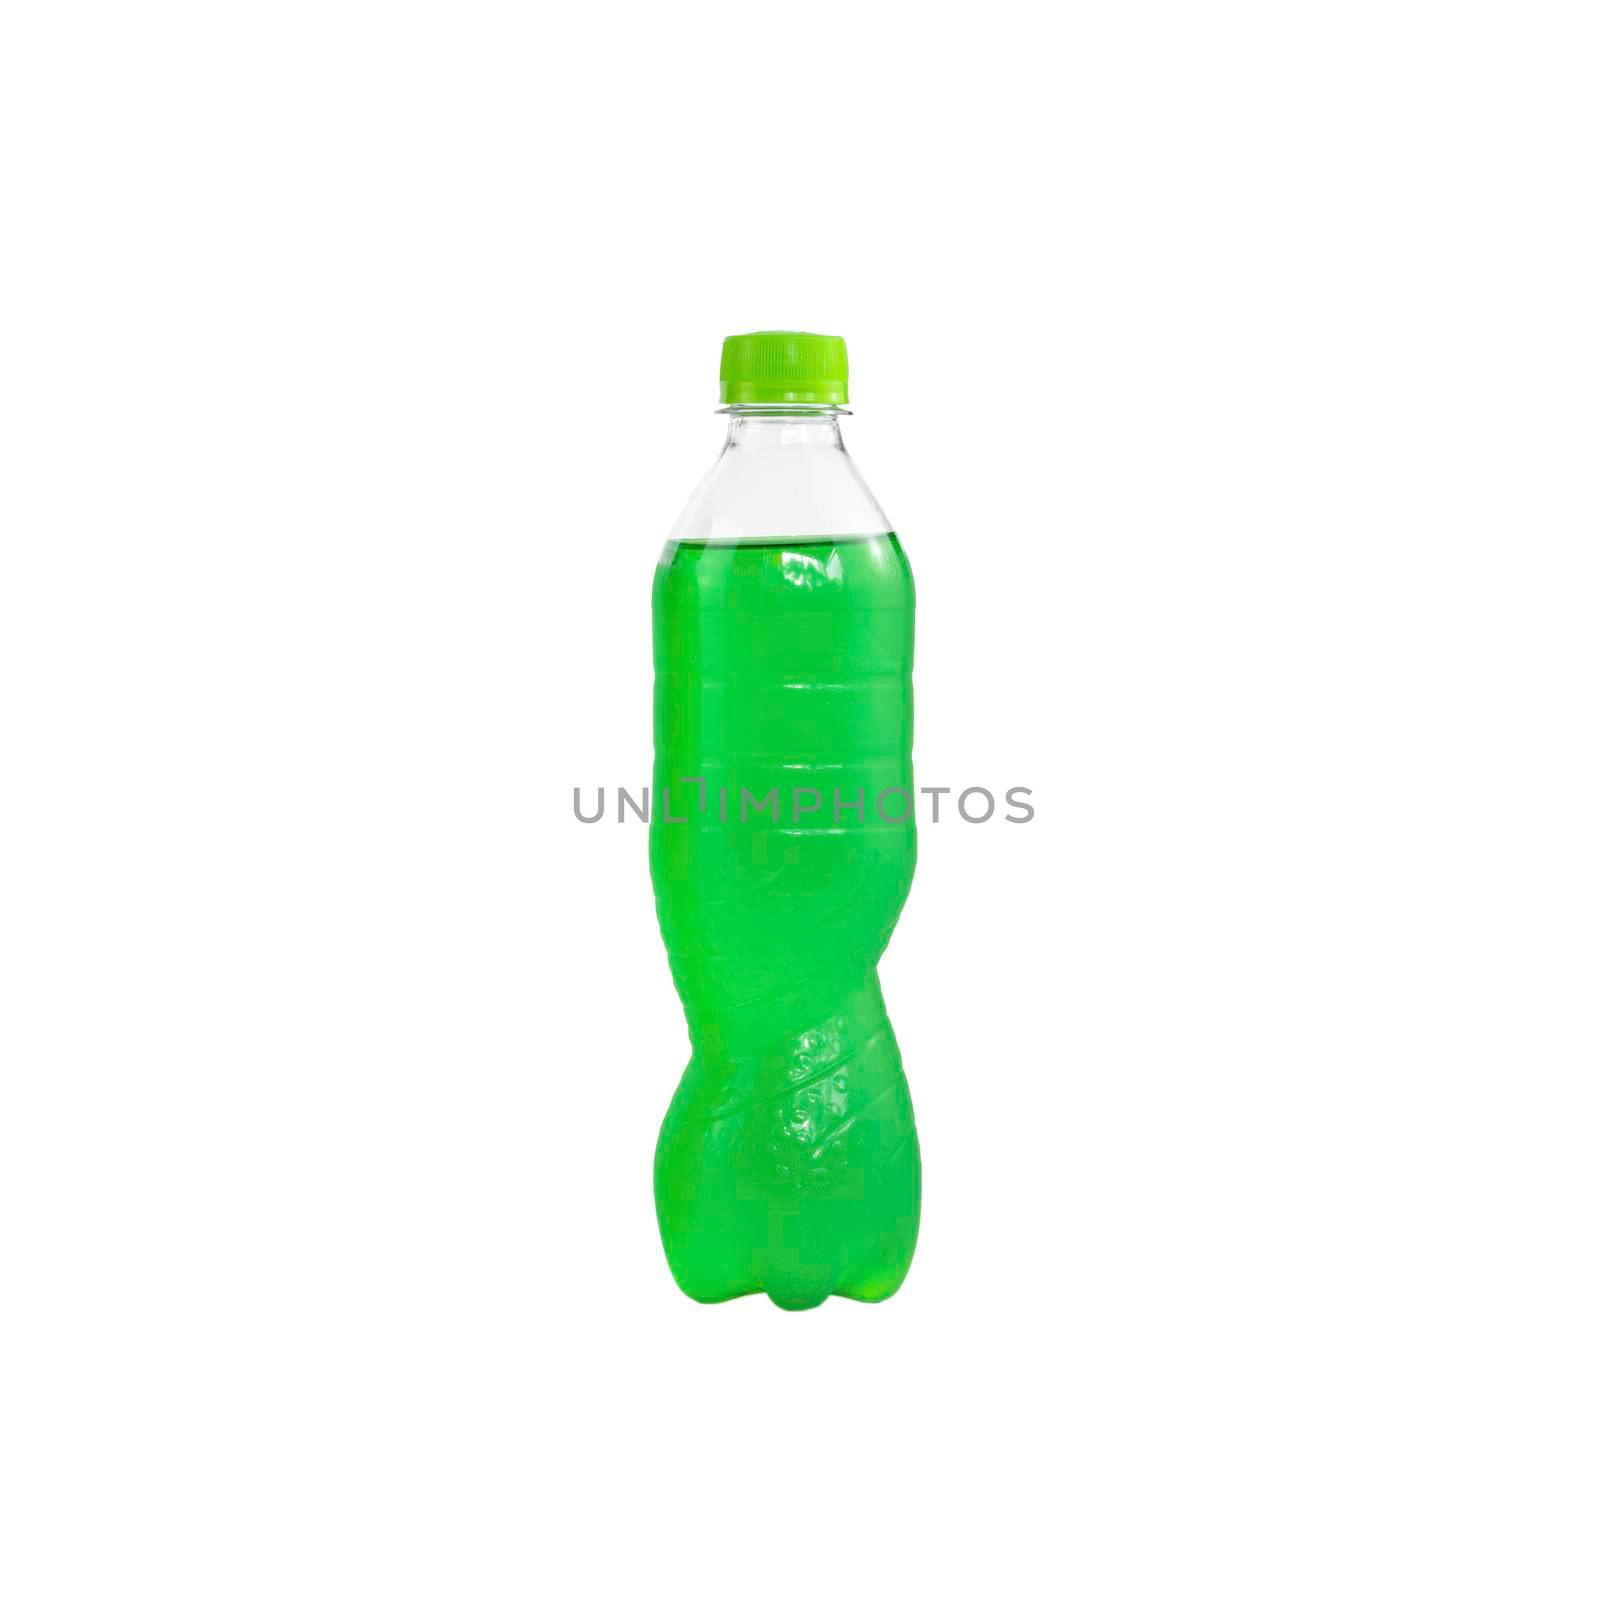 Green sparkling water in a plastic bottle isolated on white background